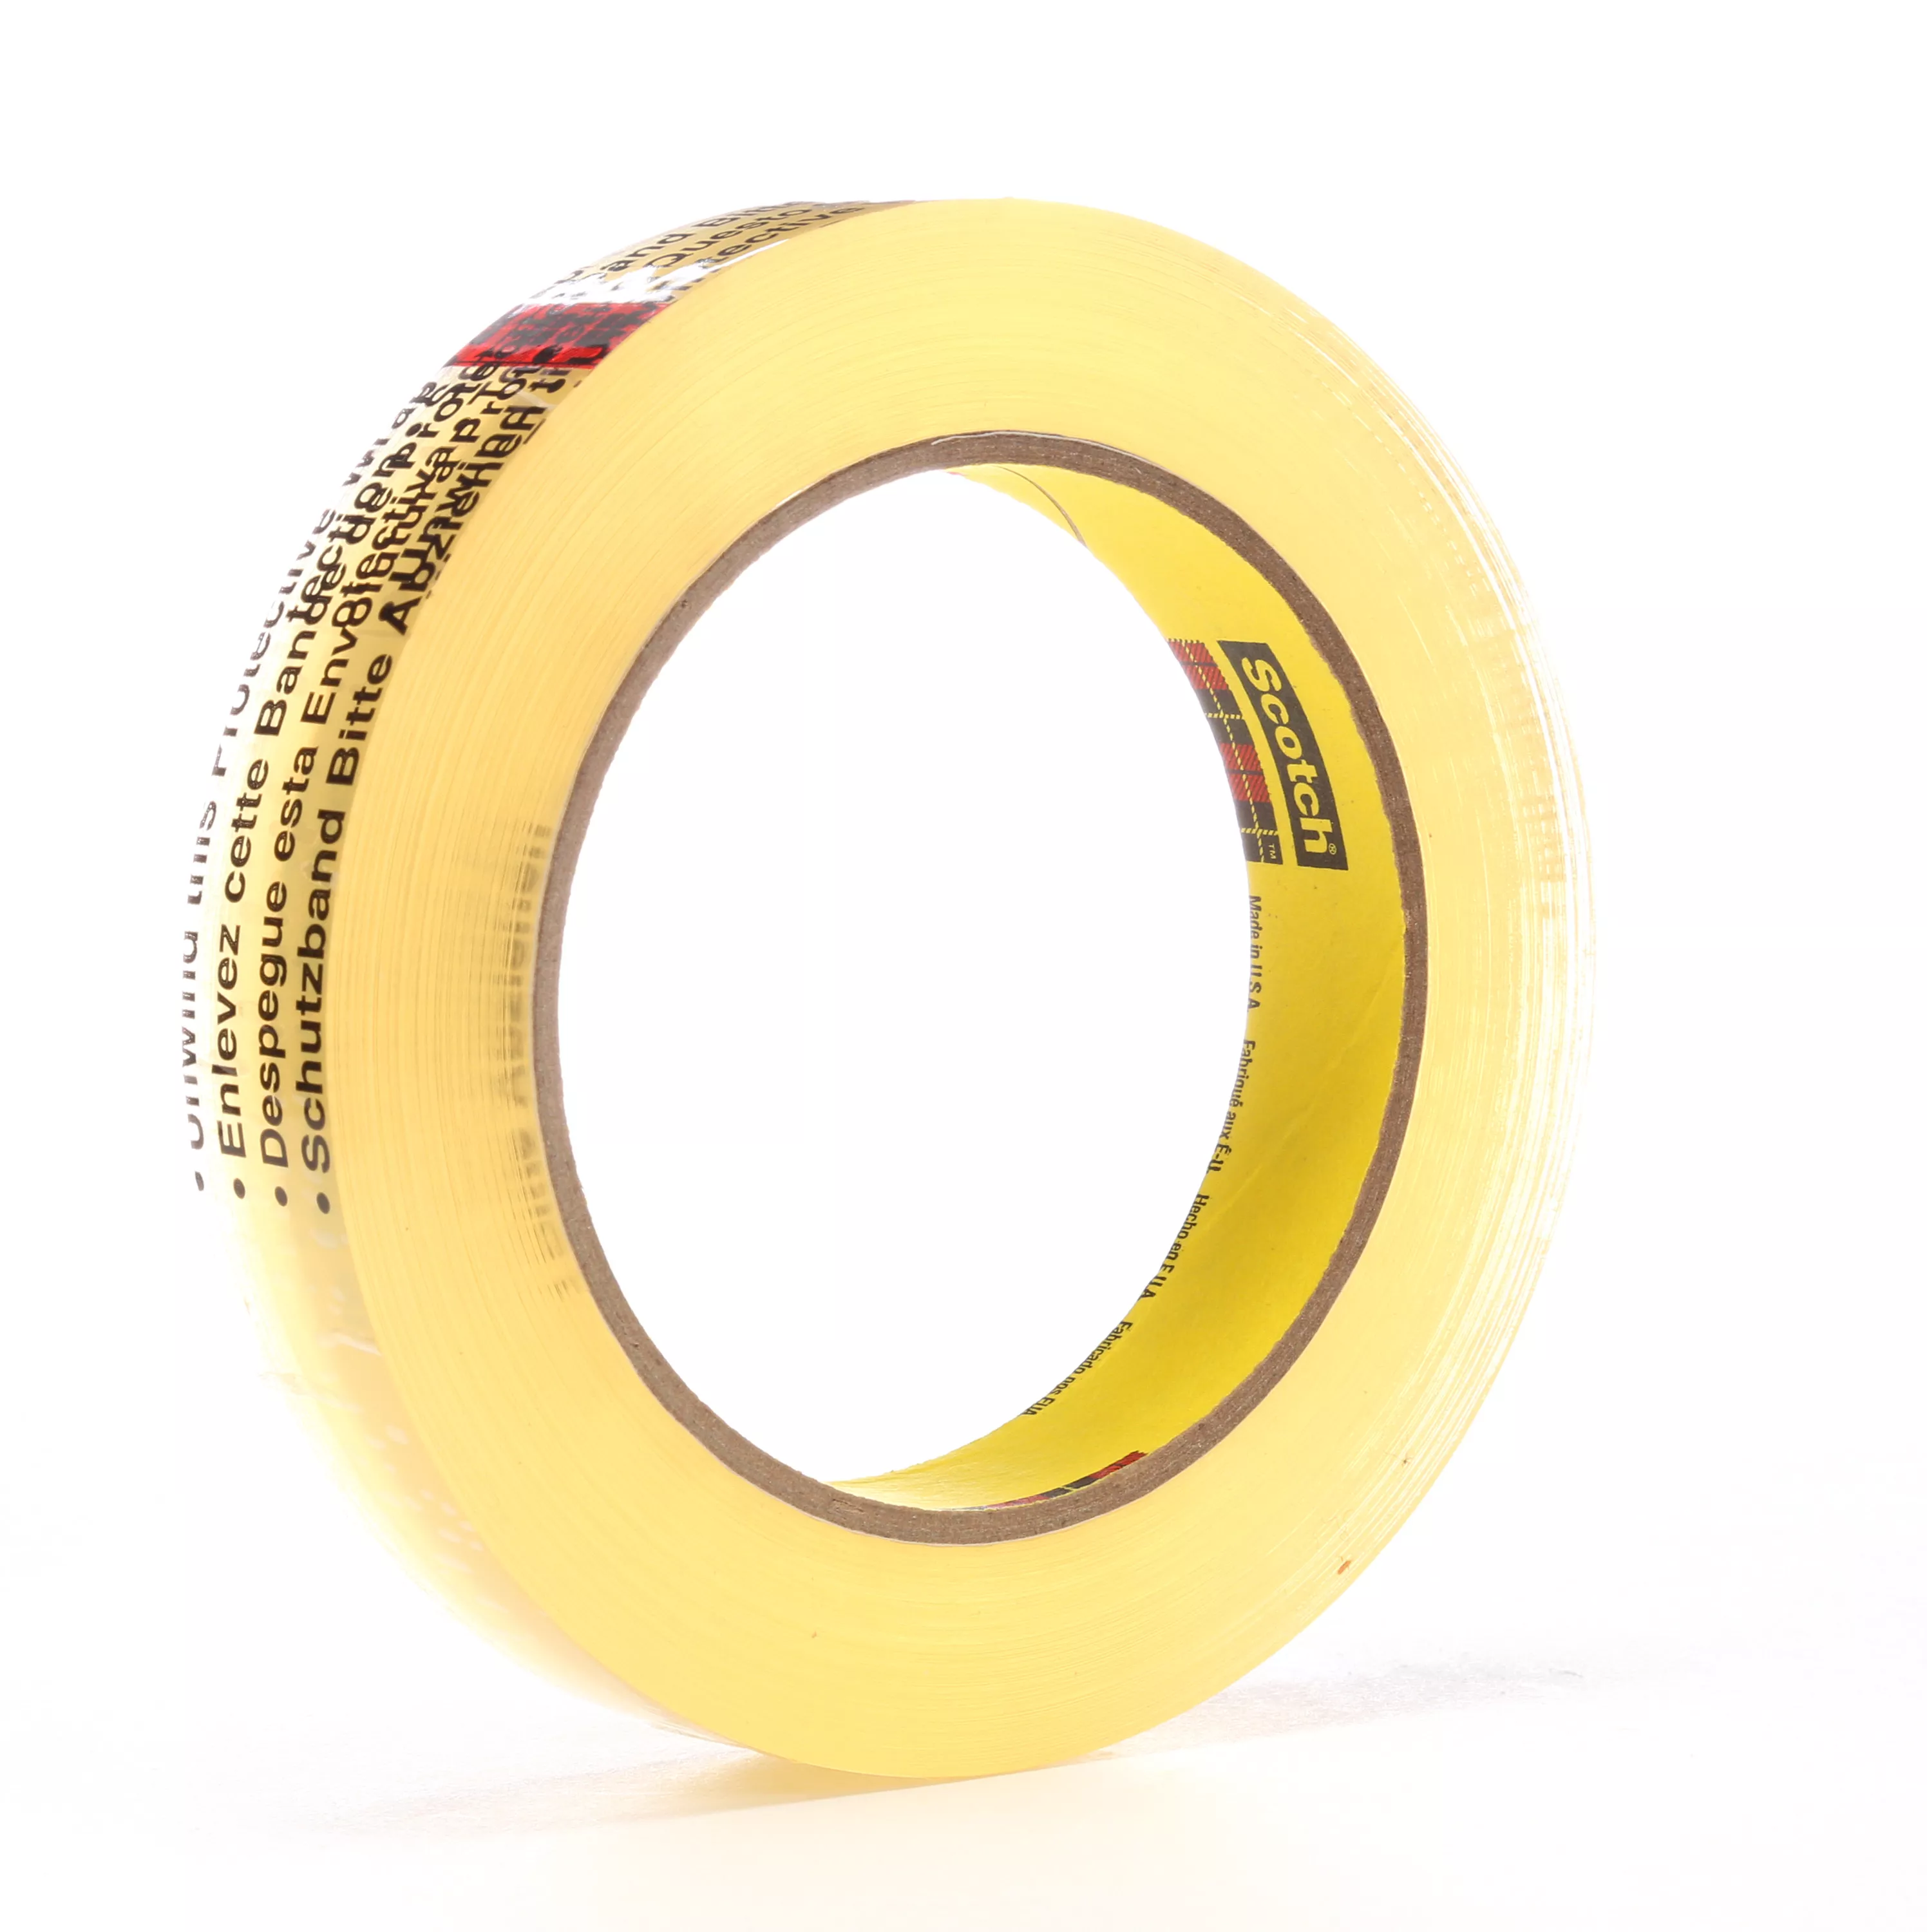 SKU 7000048391 | 3M™ Removable Repositionable Tape 665